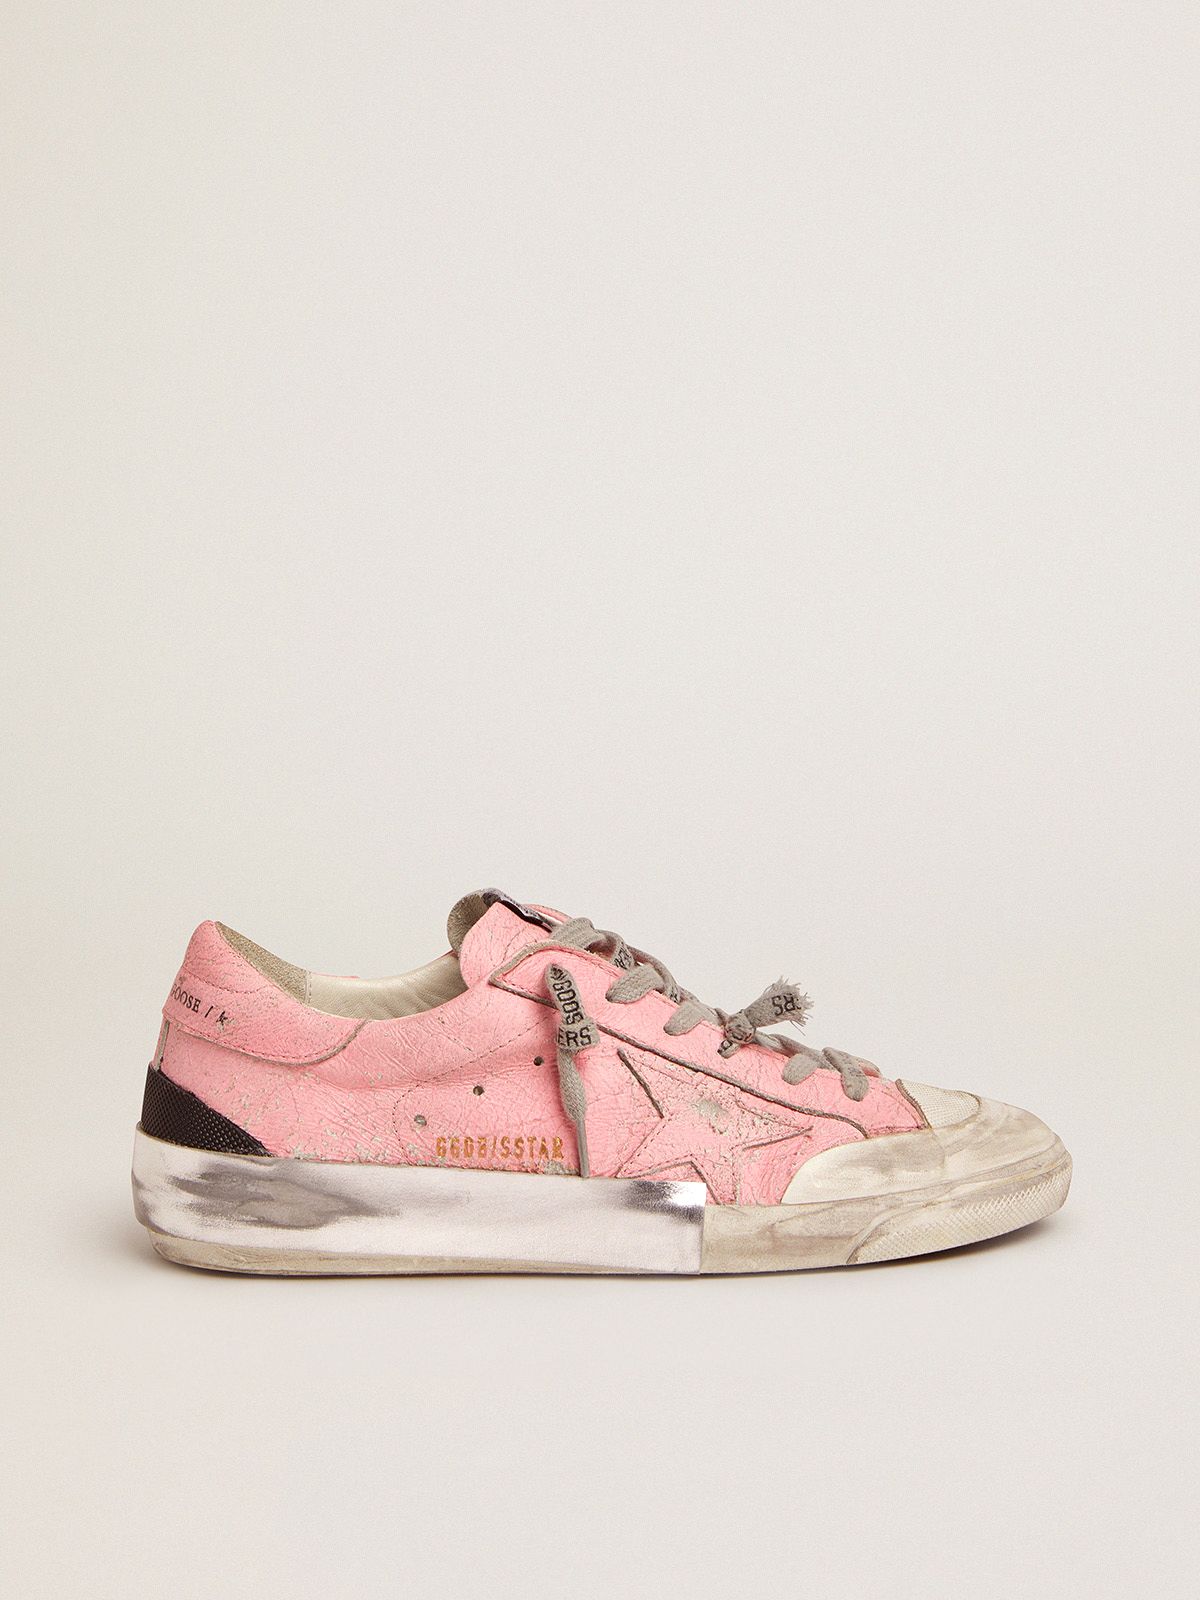 Super-Star sneakers in pink crackled leather and multi-foxing